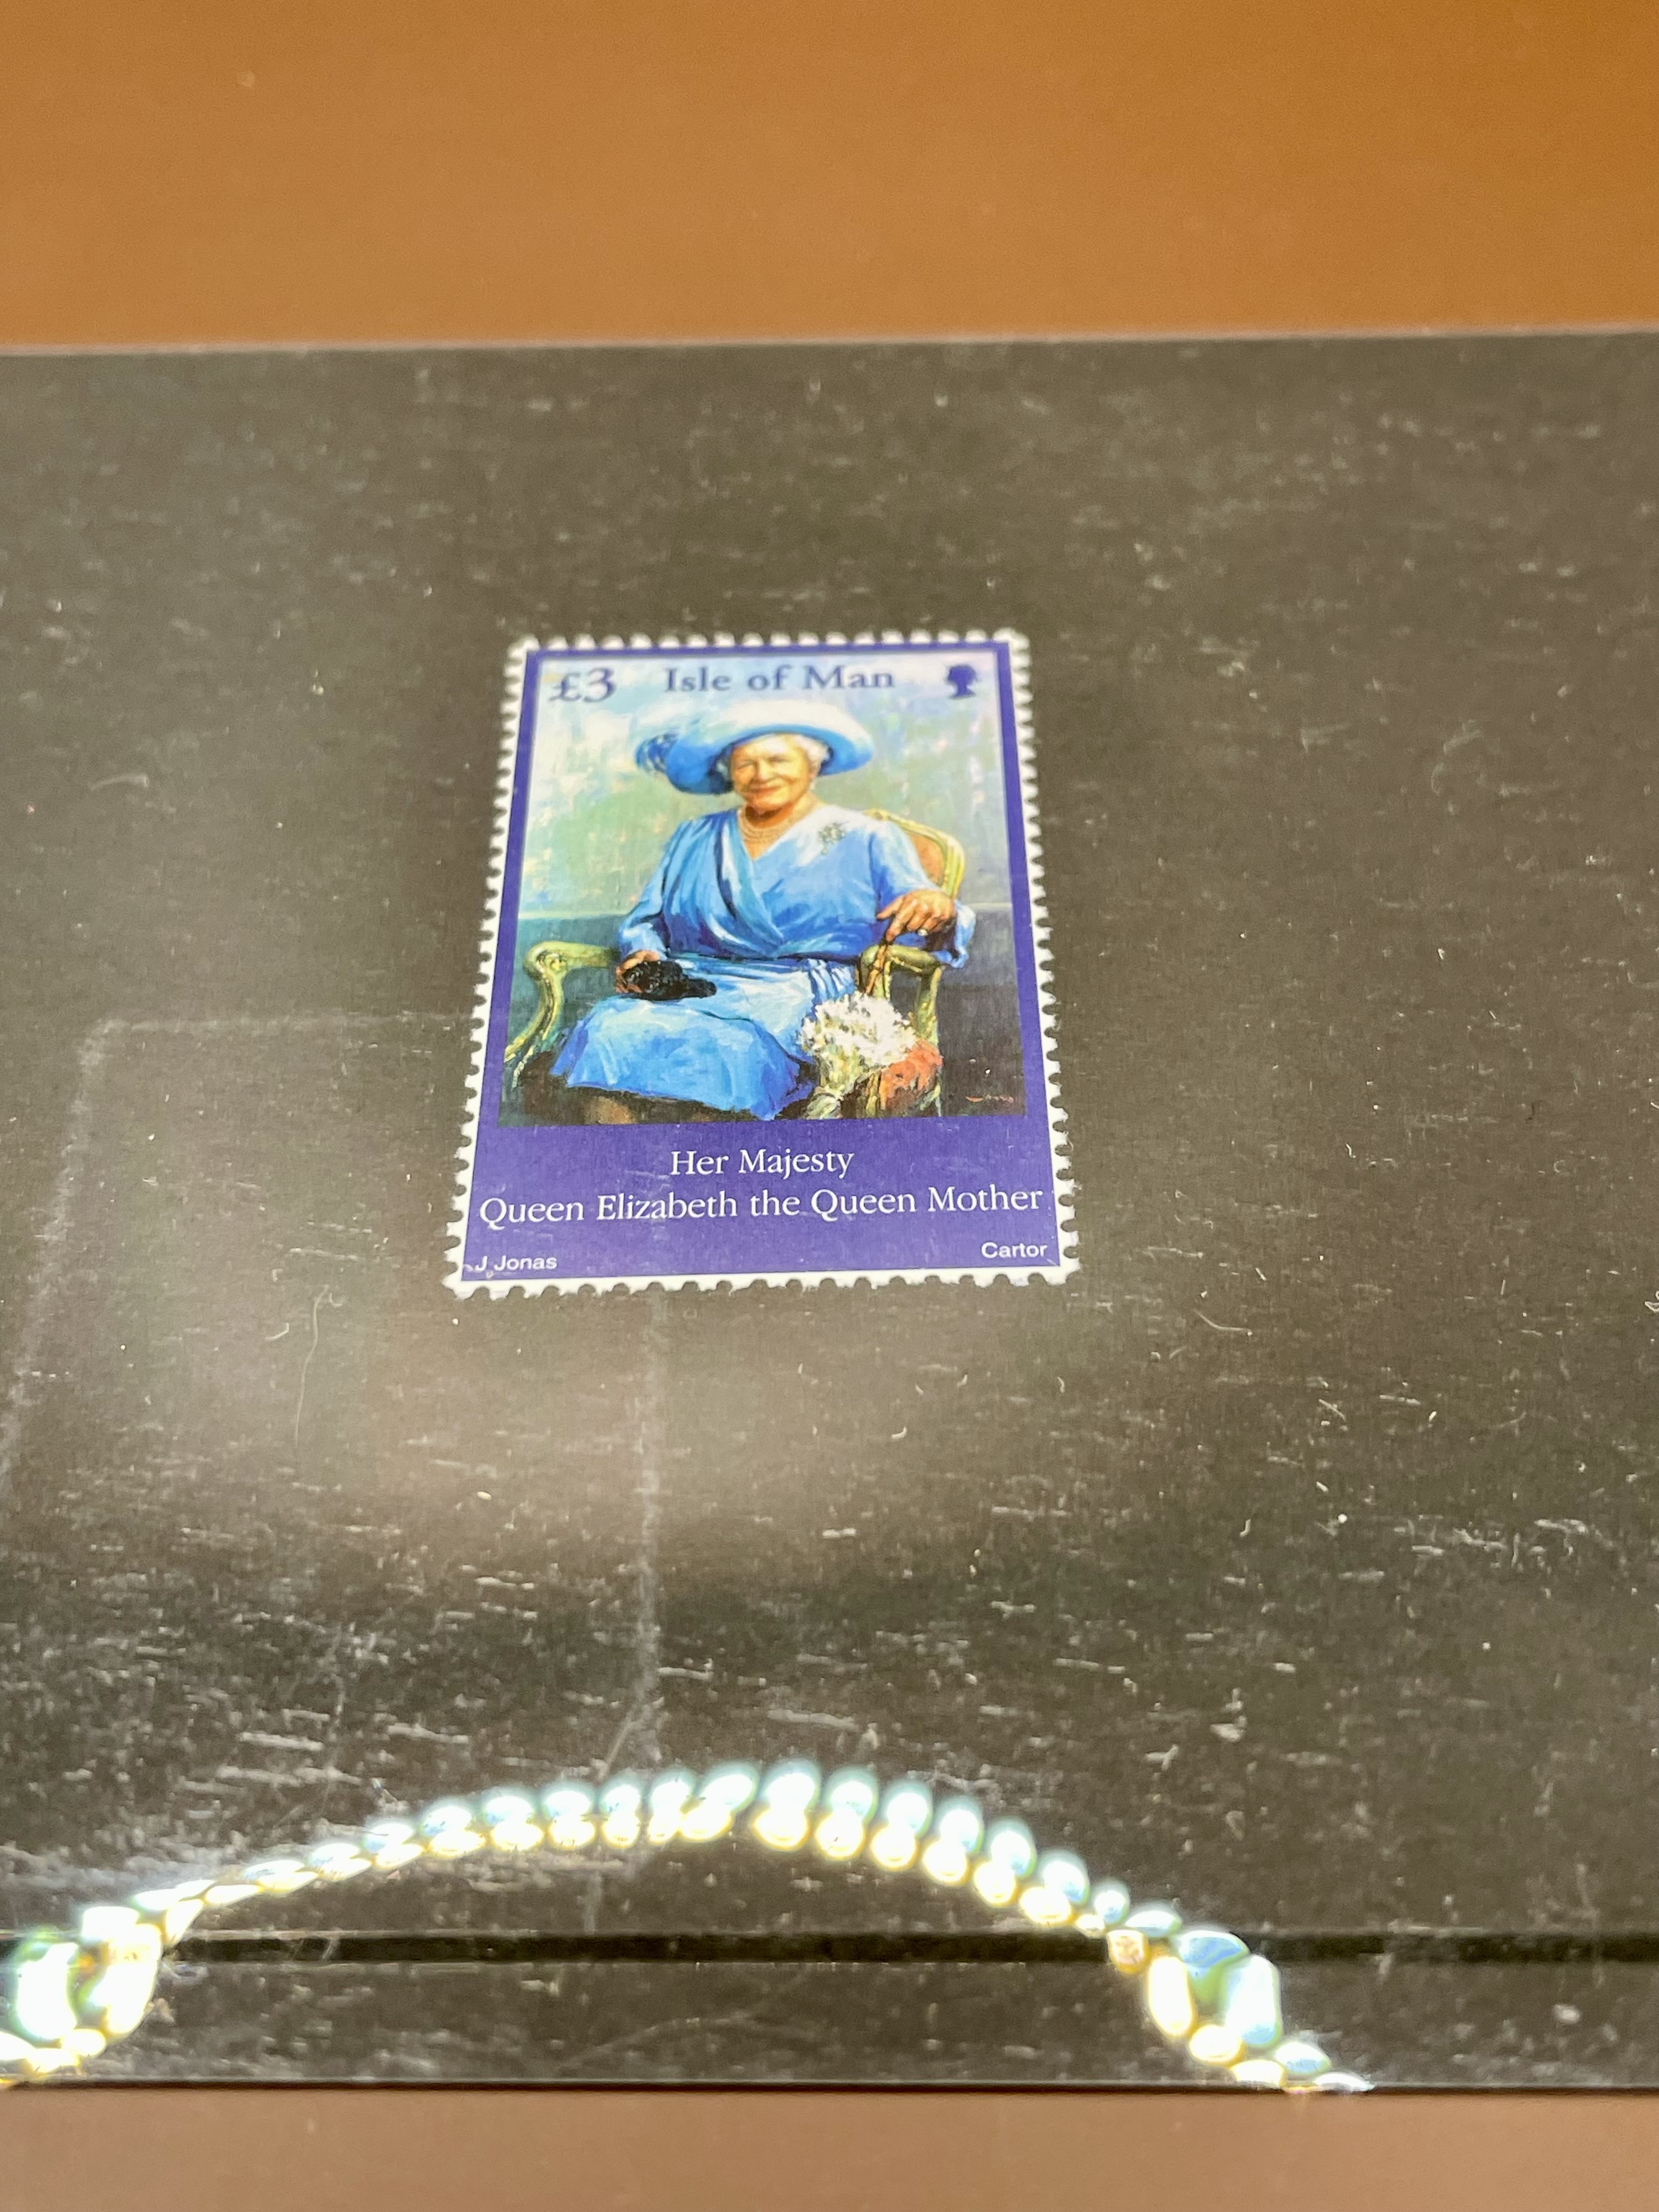 Her Majesty Queen Elizabeth The Queen mother Stamp cover - Image 2 of 3